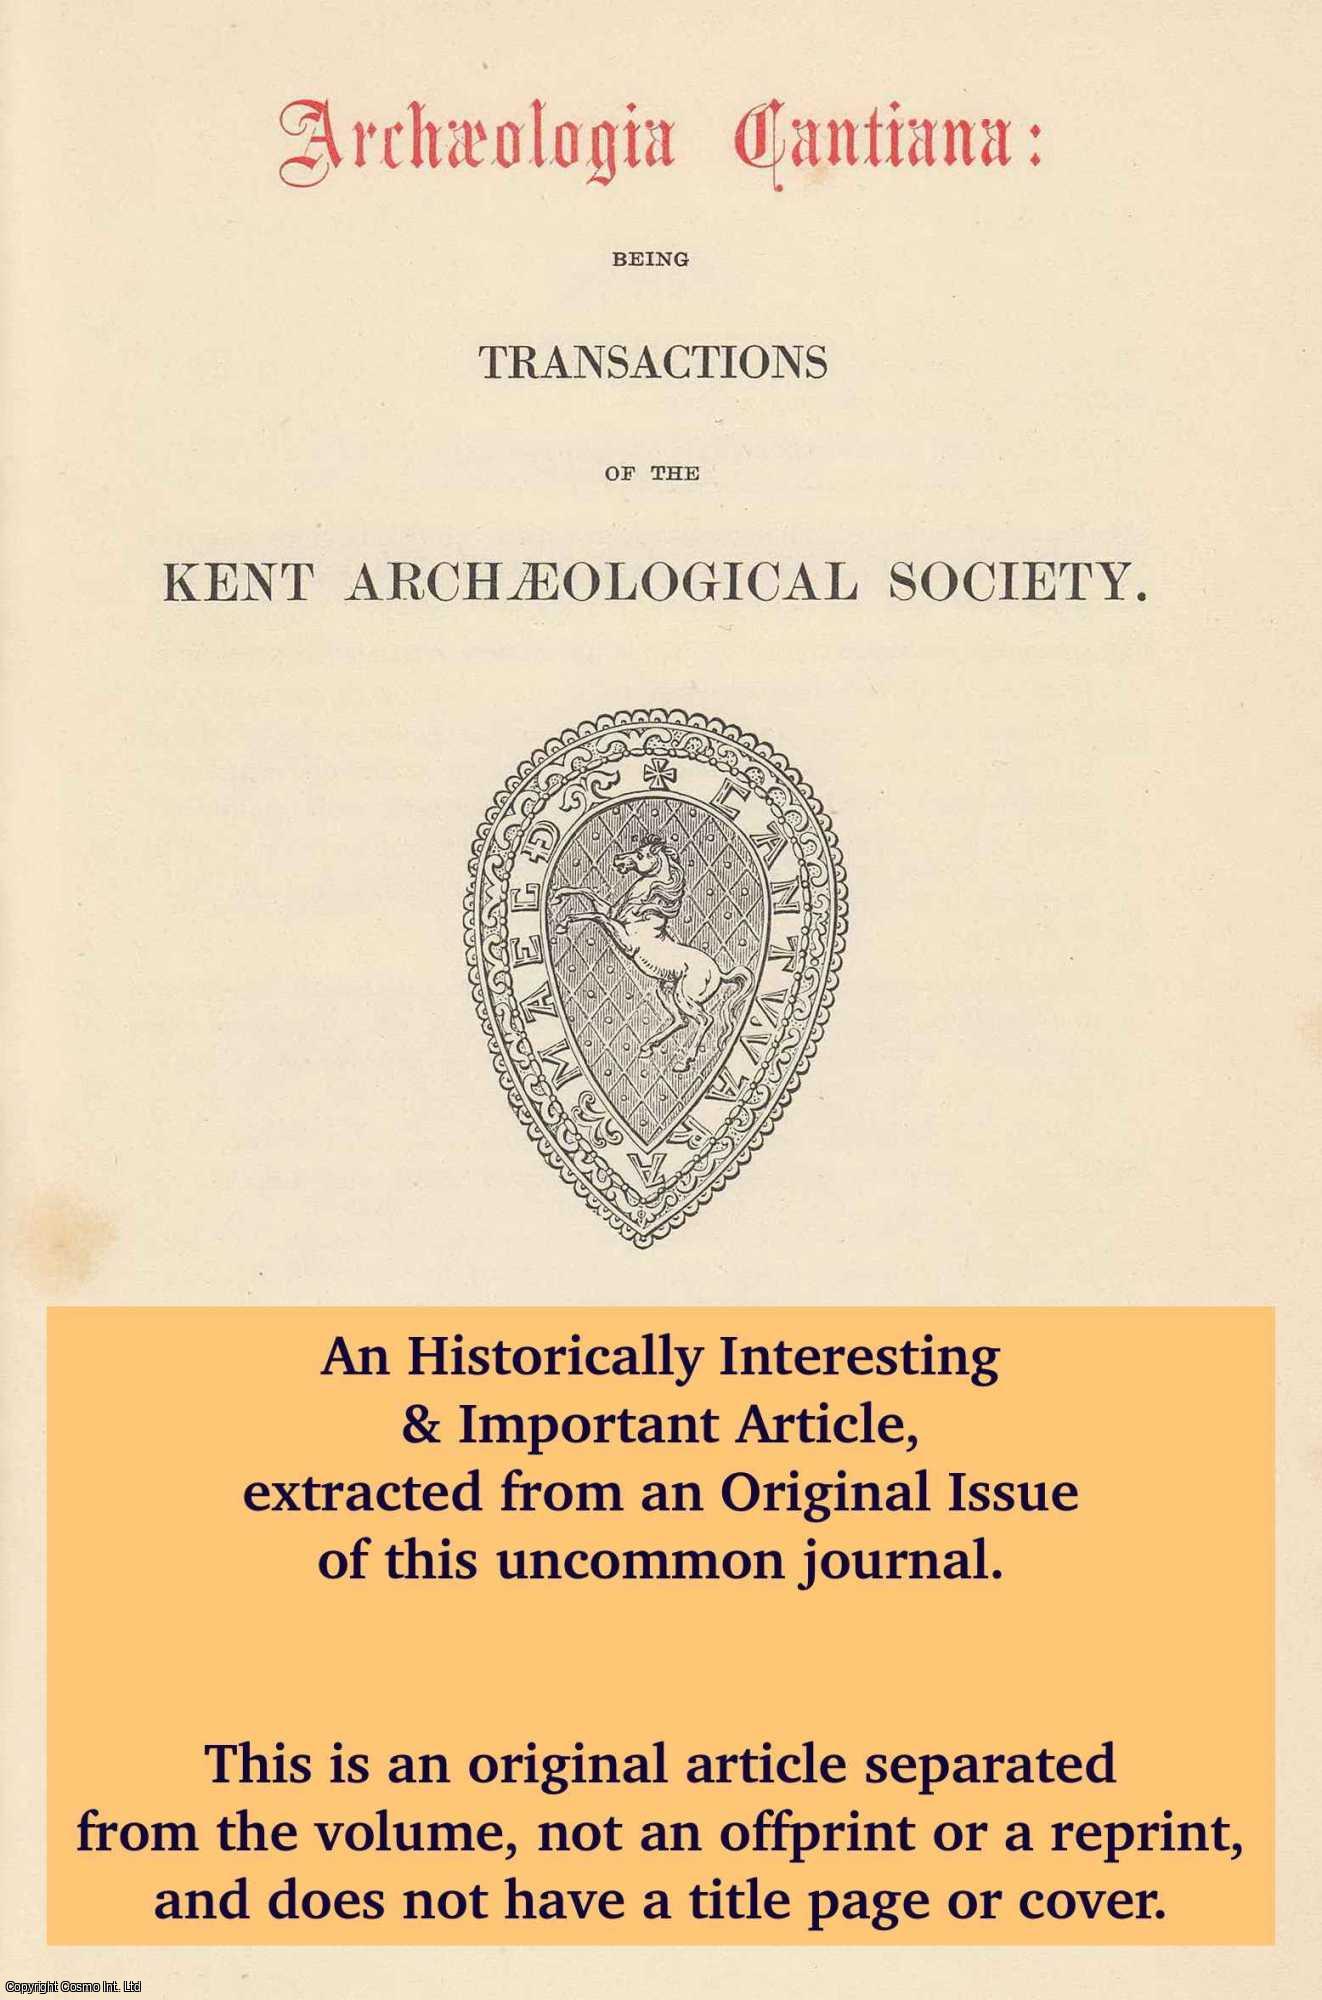 B. H. St. J. O'Neil - The Promontory Fort on Keston Common. An original article from The Archaeologia Cantiana: Transactions of The Kent Archaeological Society, 1933.